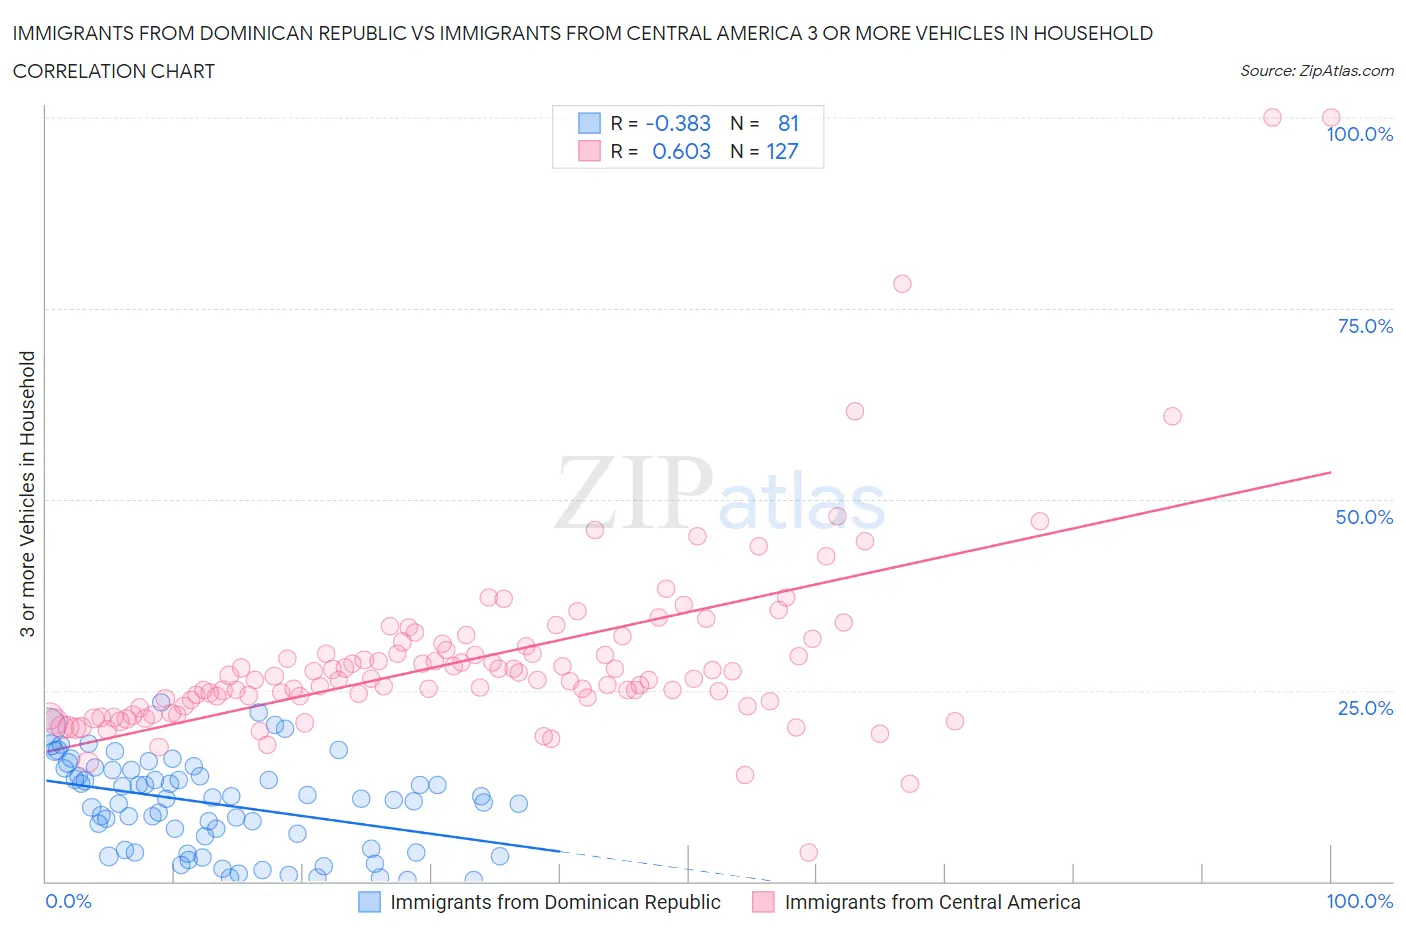 Immigrants from Dominican Republic vs Immigrants from Central America 3 or more Vehicles in Household